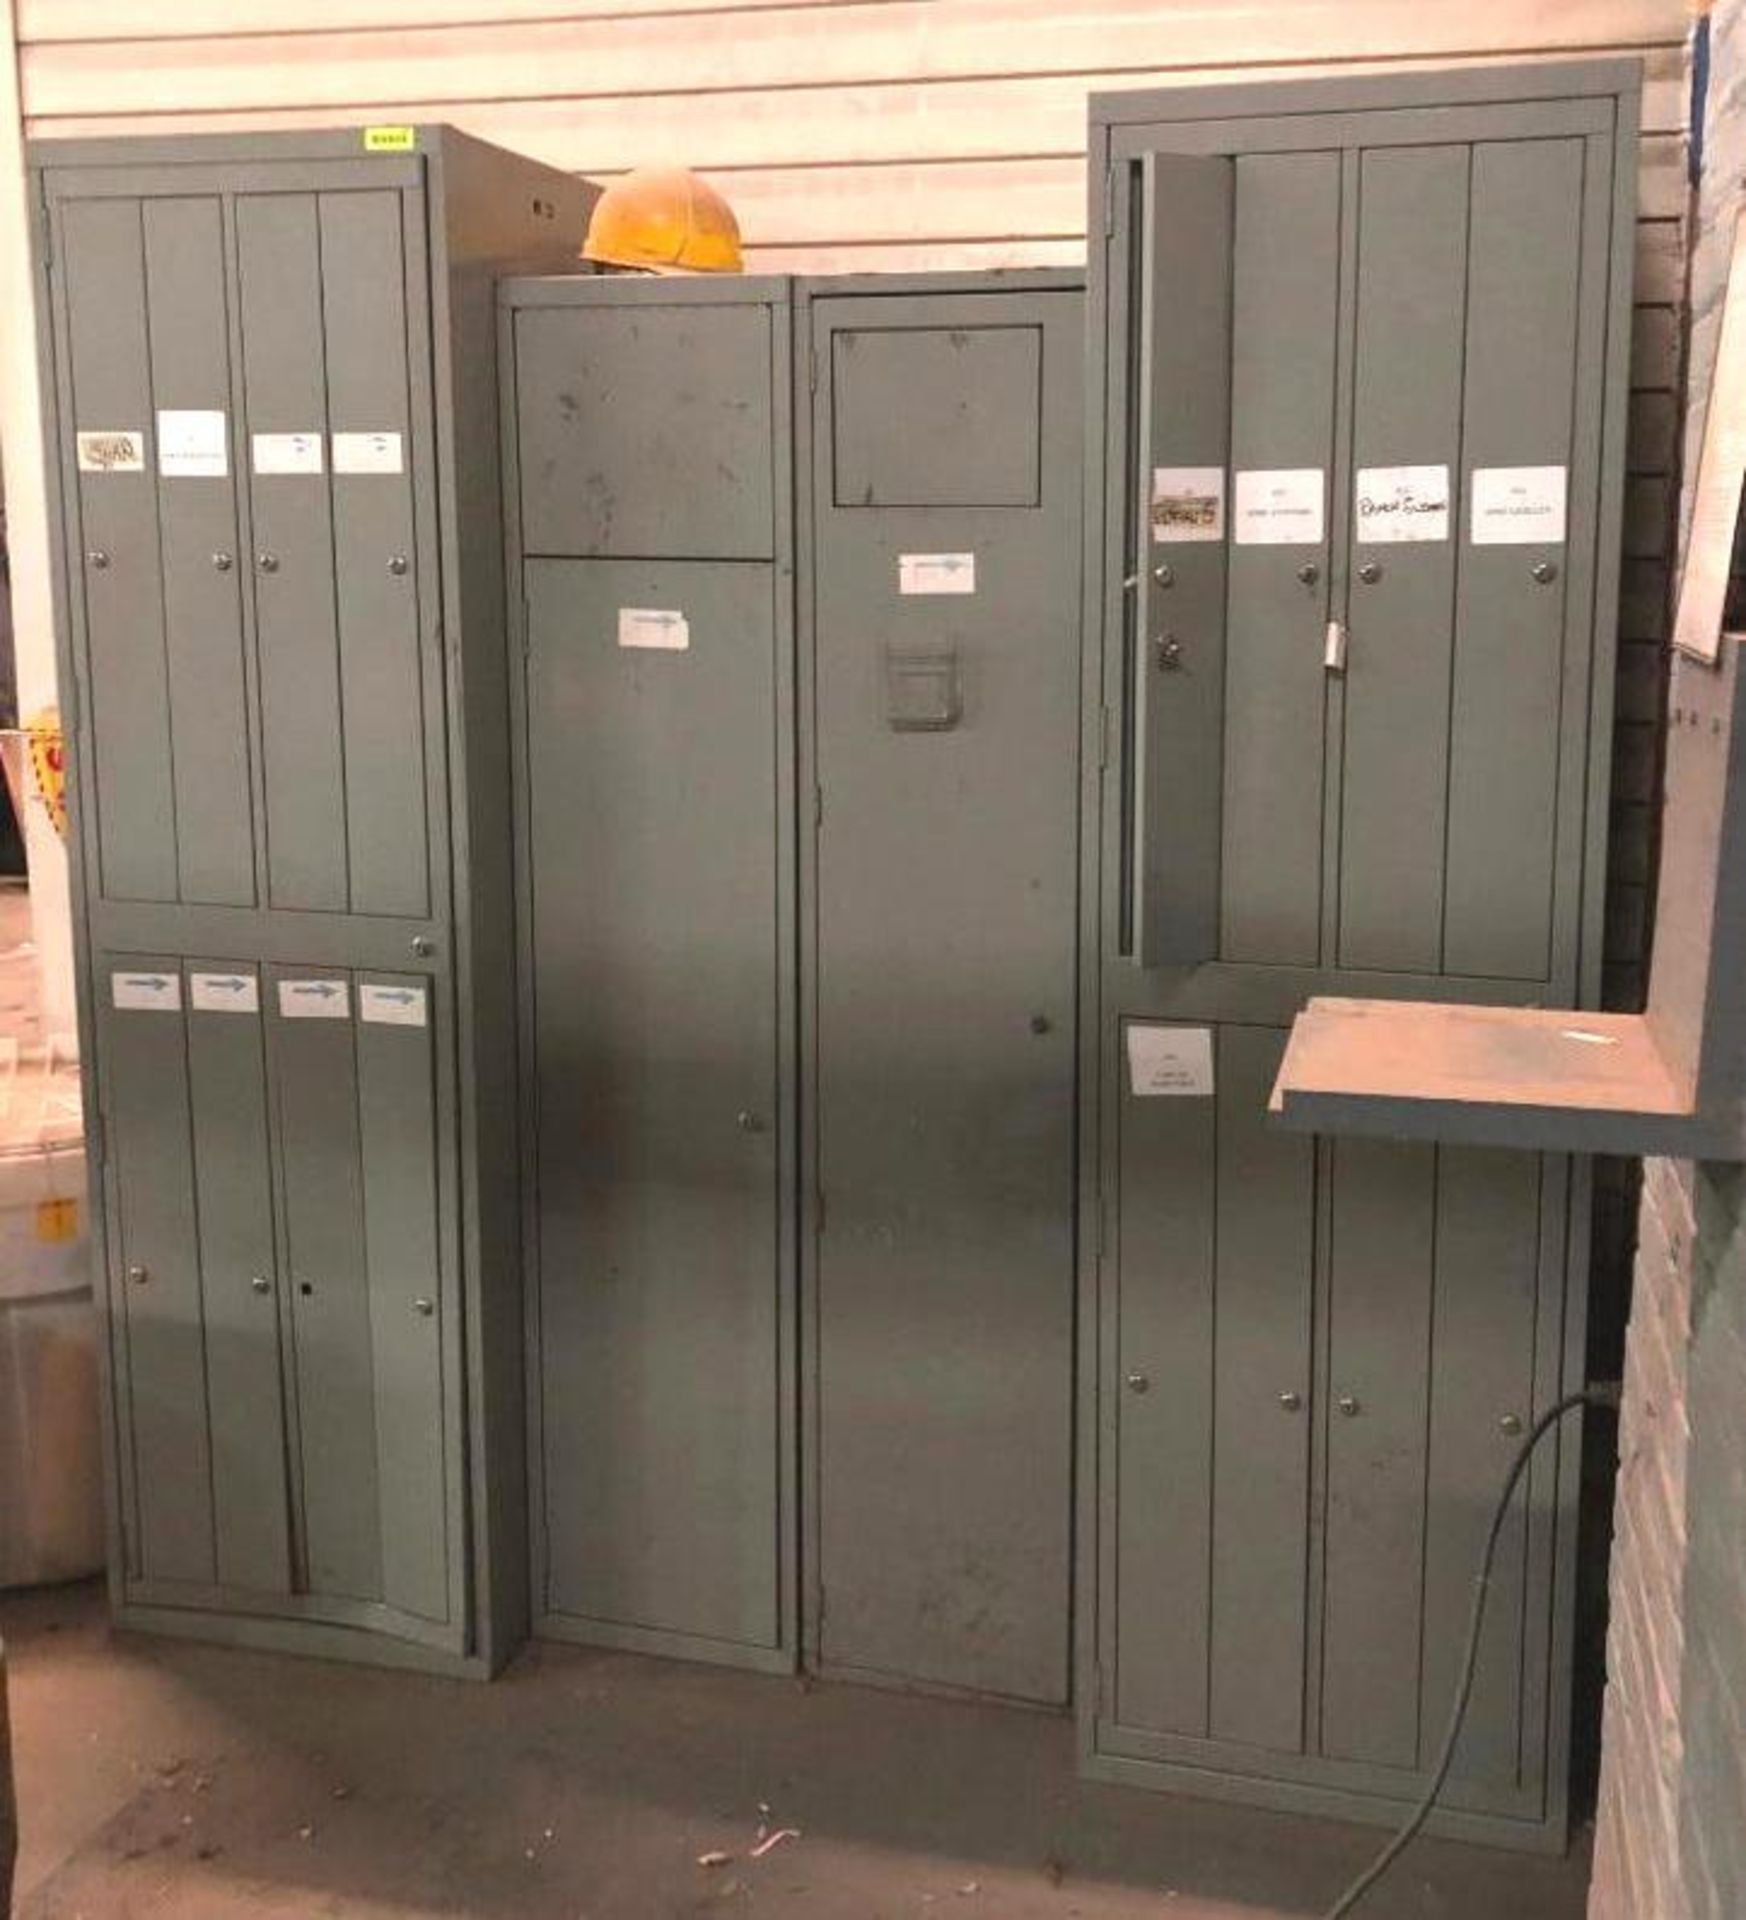 DESCRIPTION LOCKER SYSTEM WITH (2) LAUNDRY SECTIONS SIZE 82" THIS LOT IS ONE MONEY QUANTITY: X BID 1